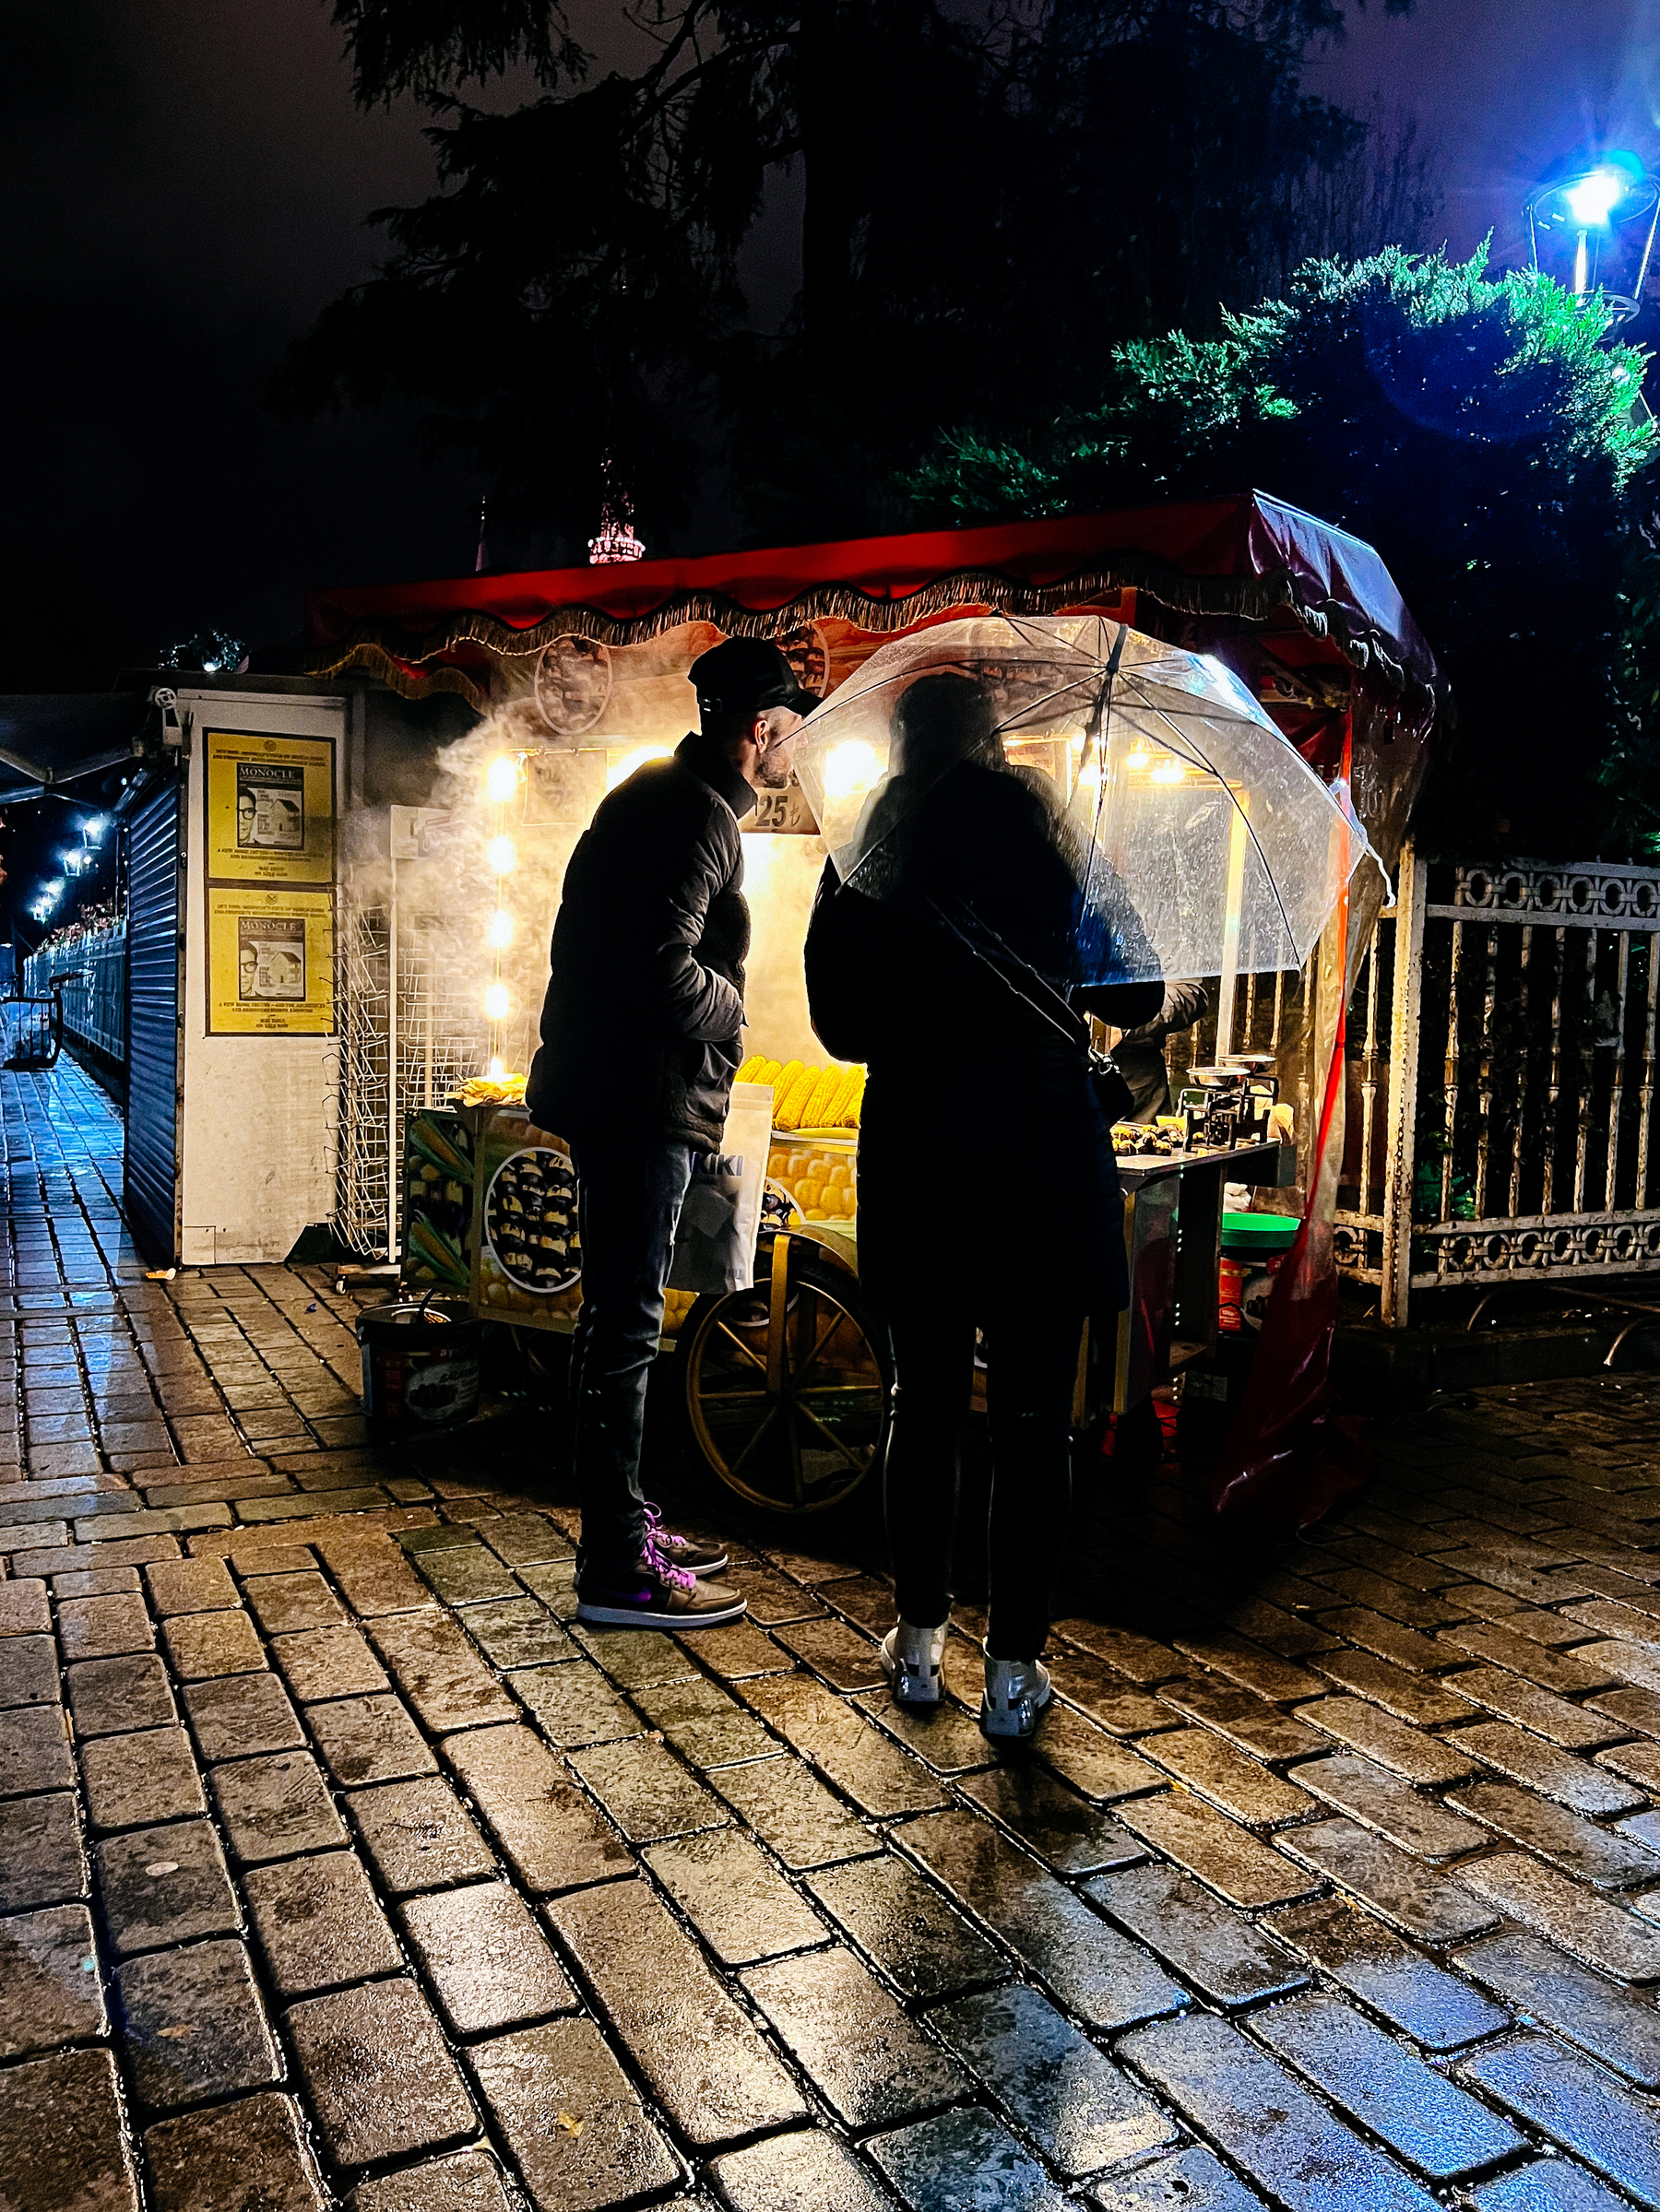 A couple by a roasted corn stall. The woman is holding an umbrella. 